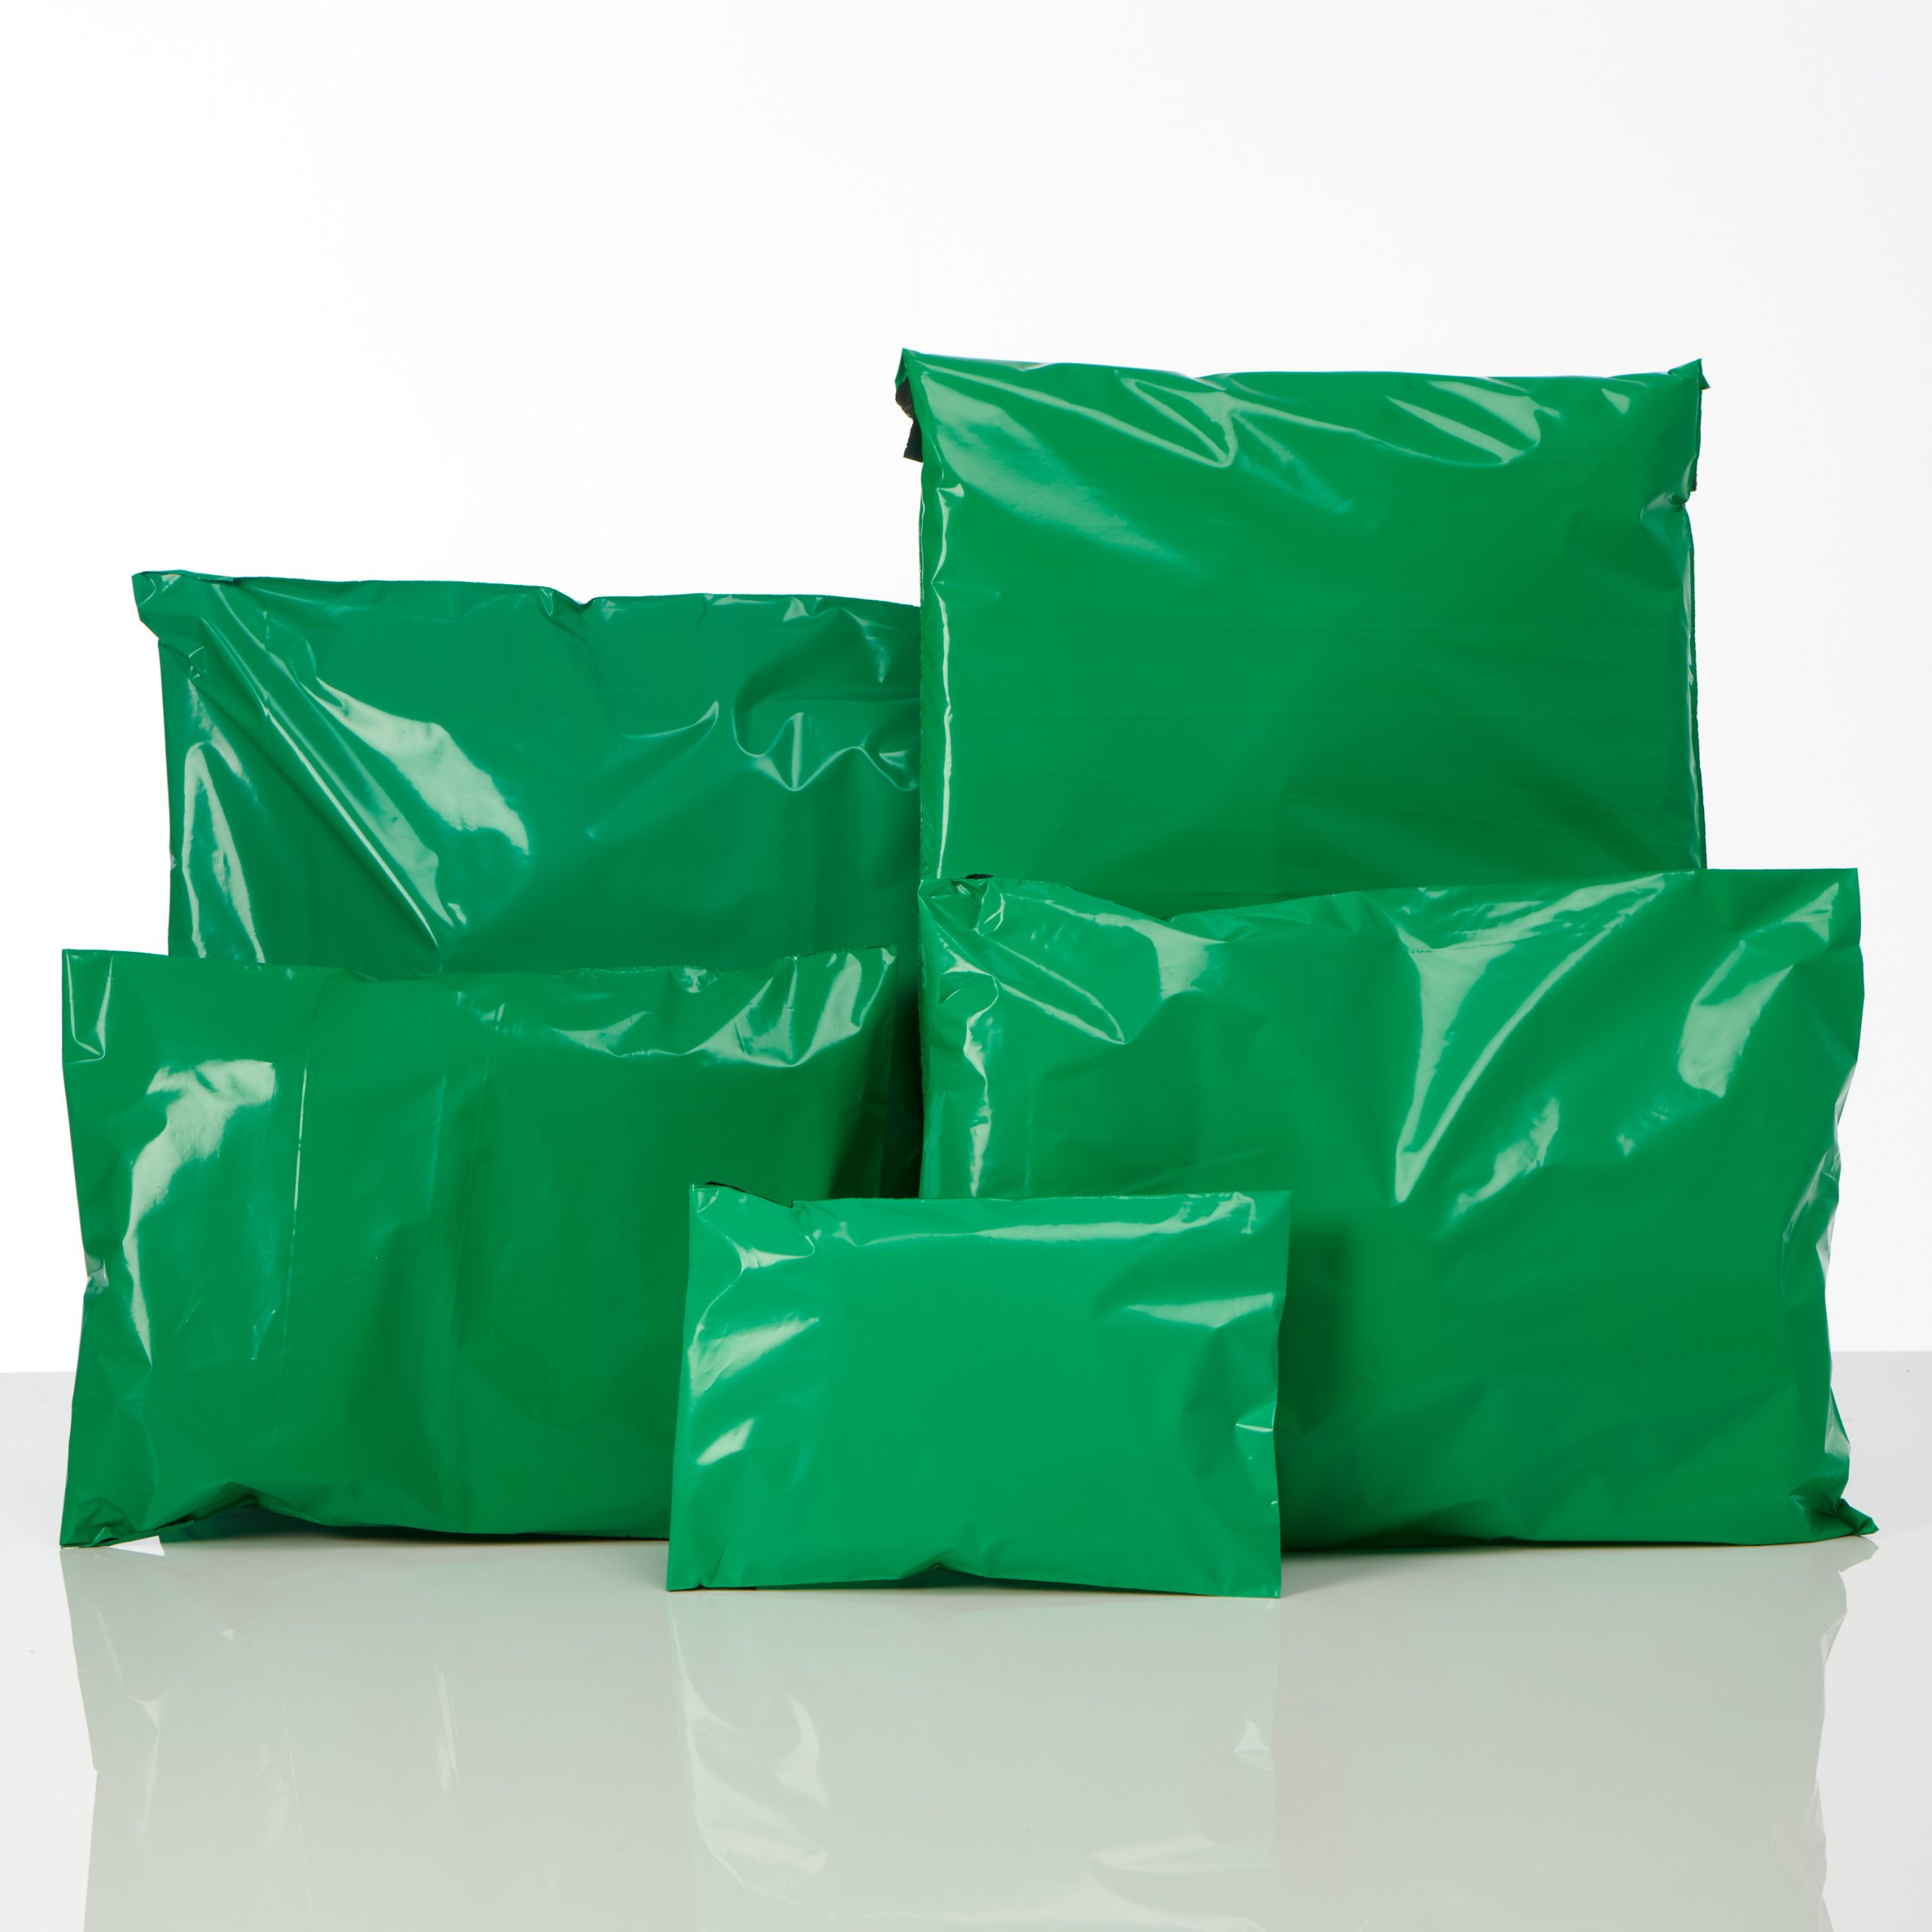 25 Olive Green 12" x 16" Mailing Postage Postal Mail Bags 